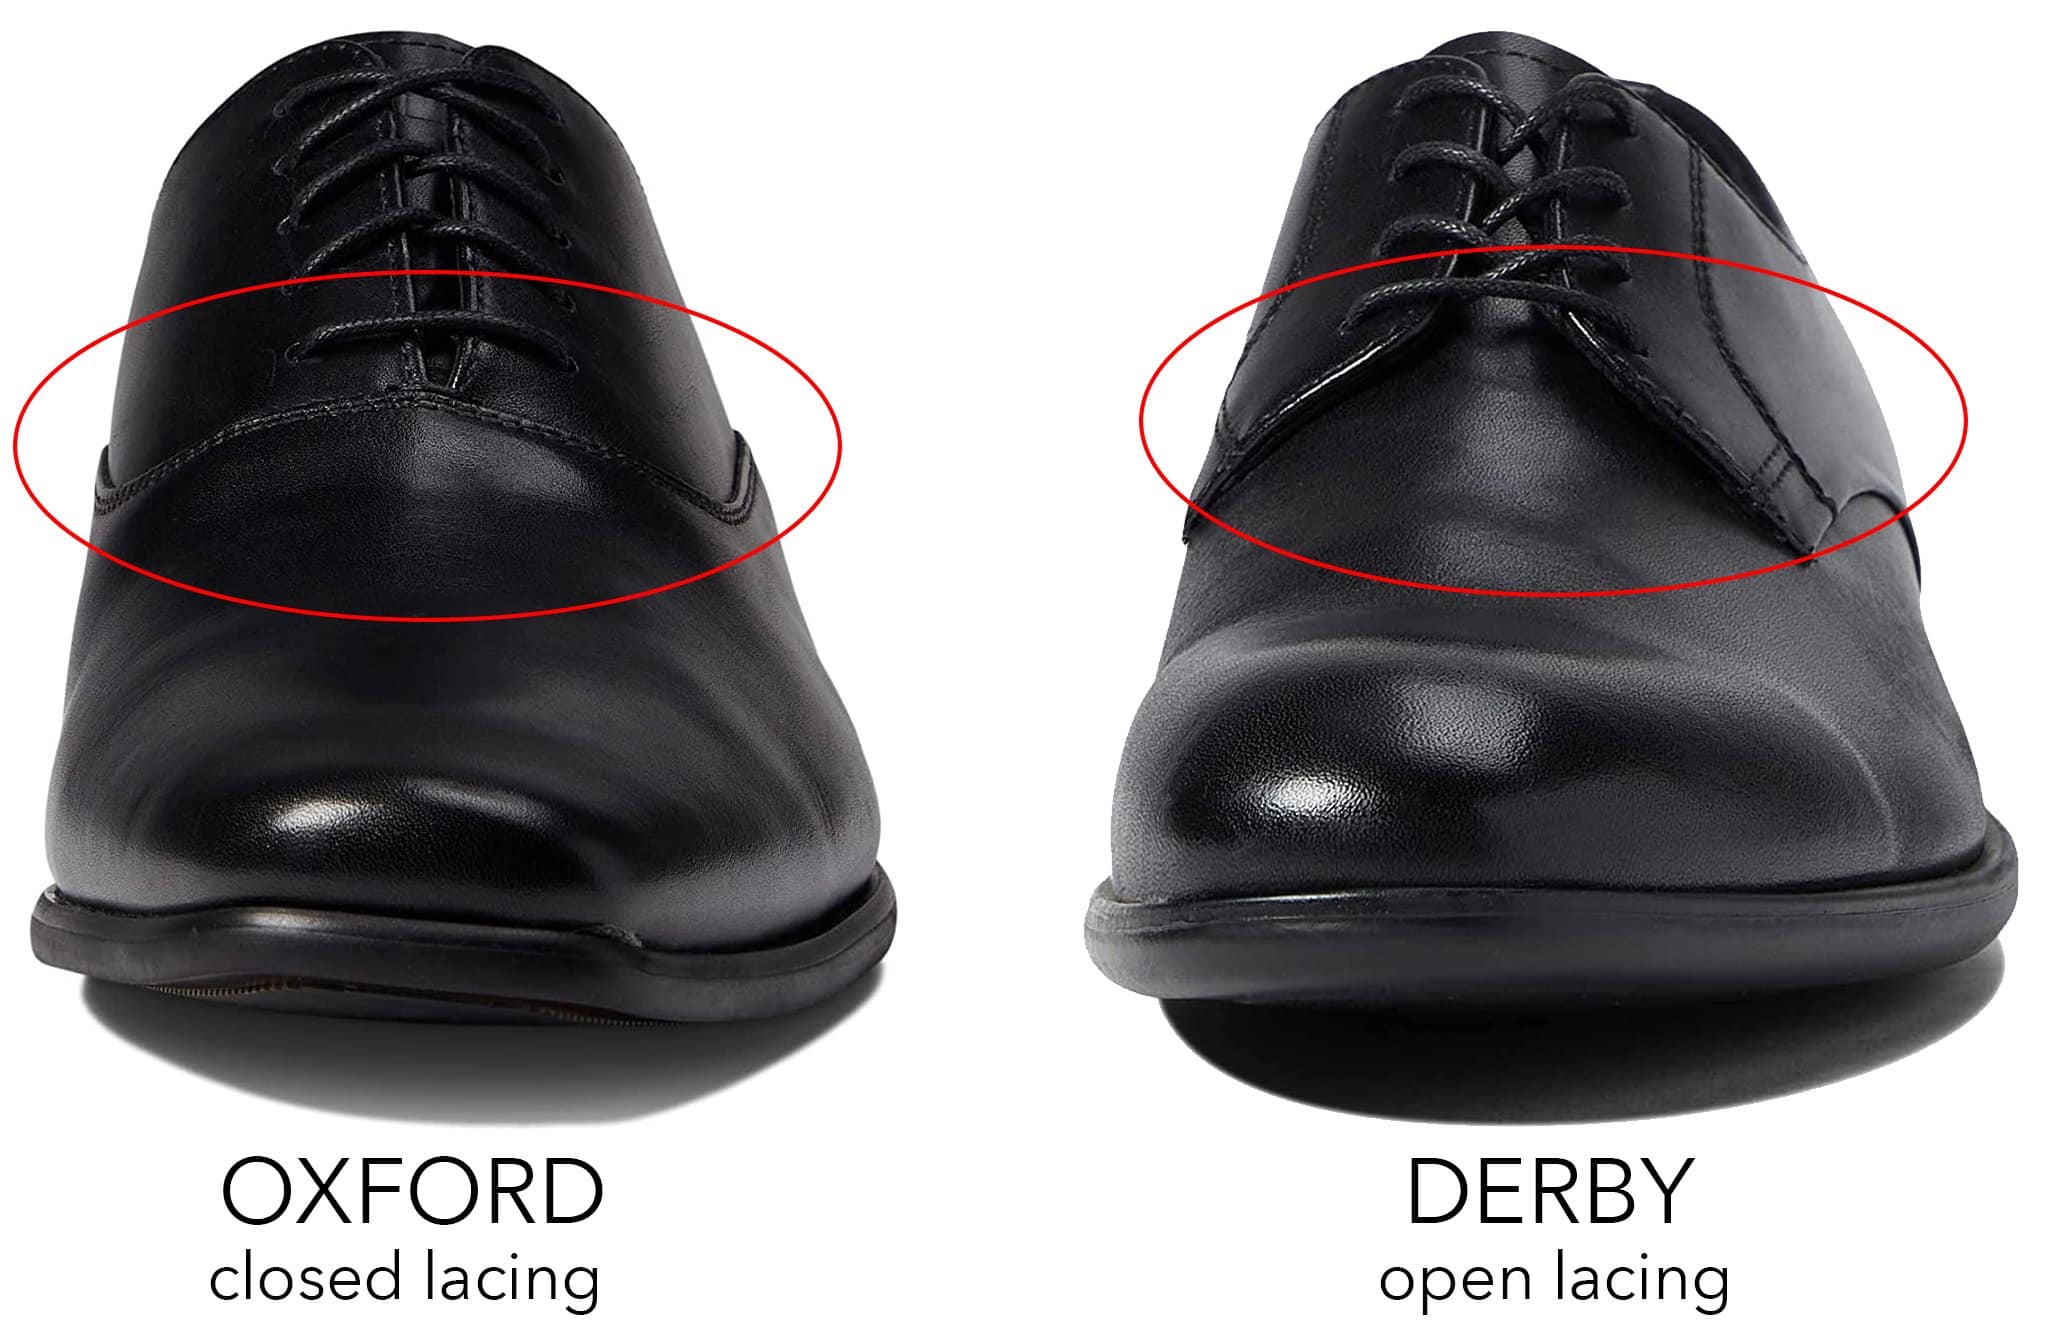 While they look similar, oxford shoes have a closed lacing while derby shoes have open lacing